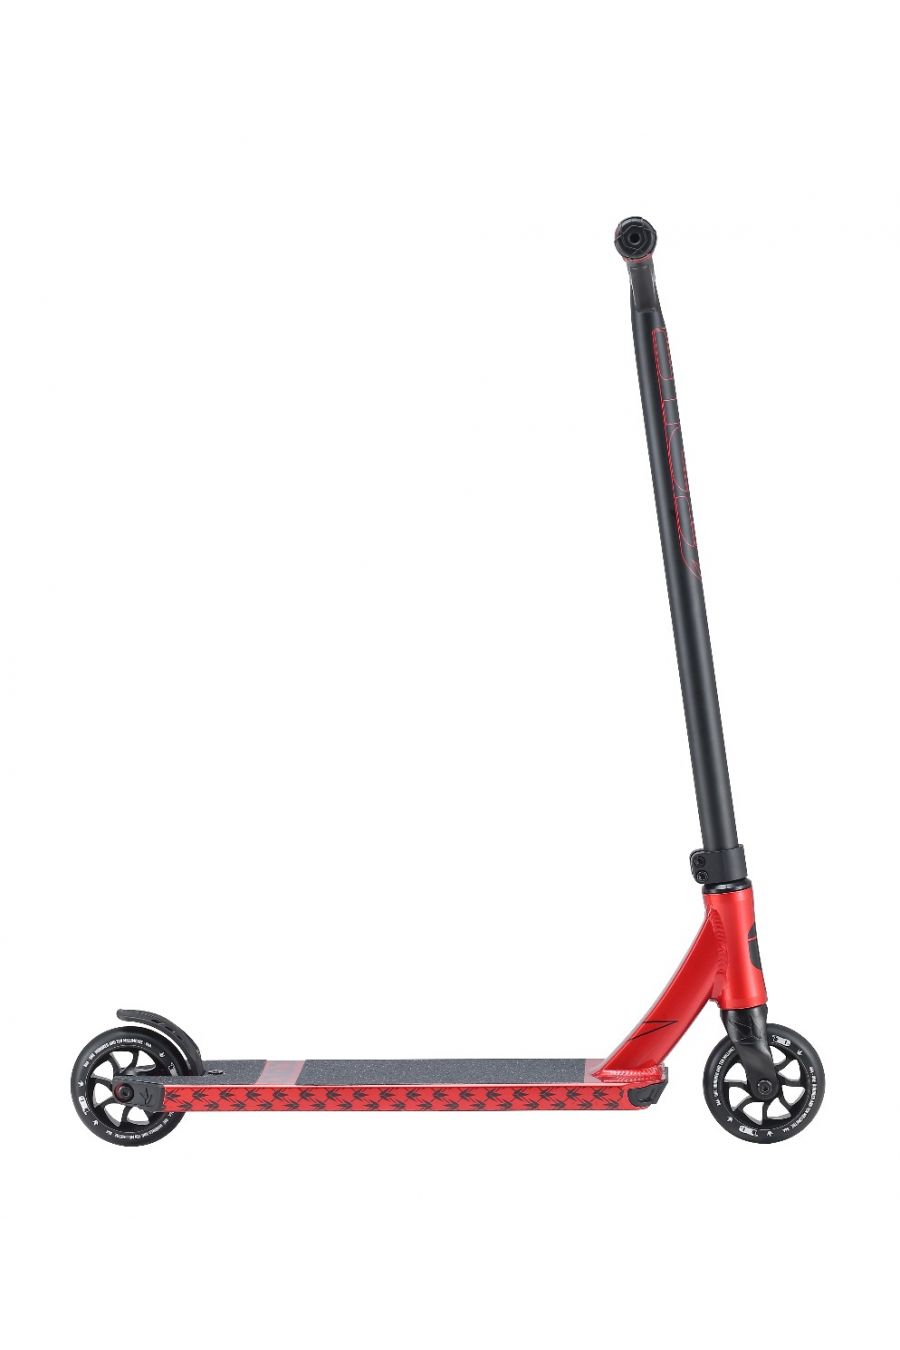 Envy Colt S4 Complete Scooter (Red)